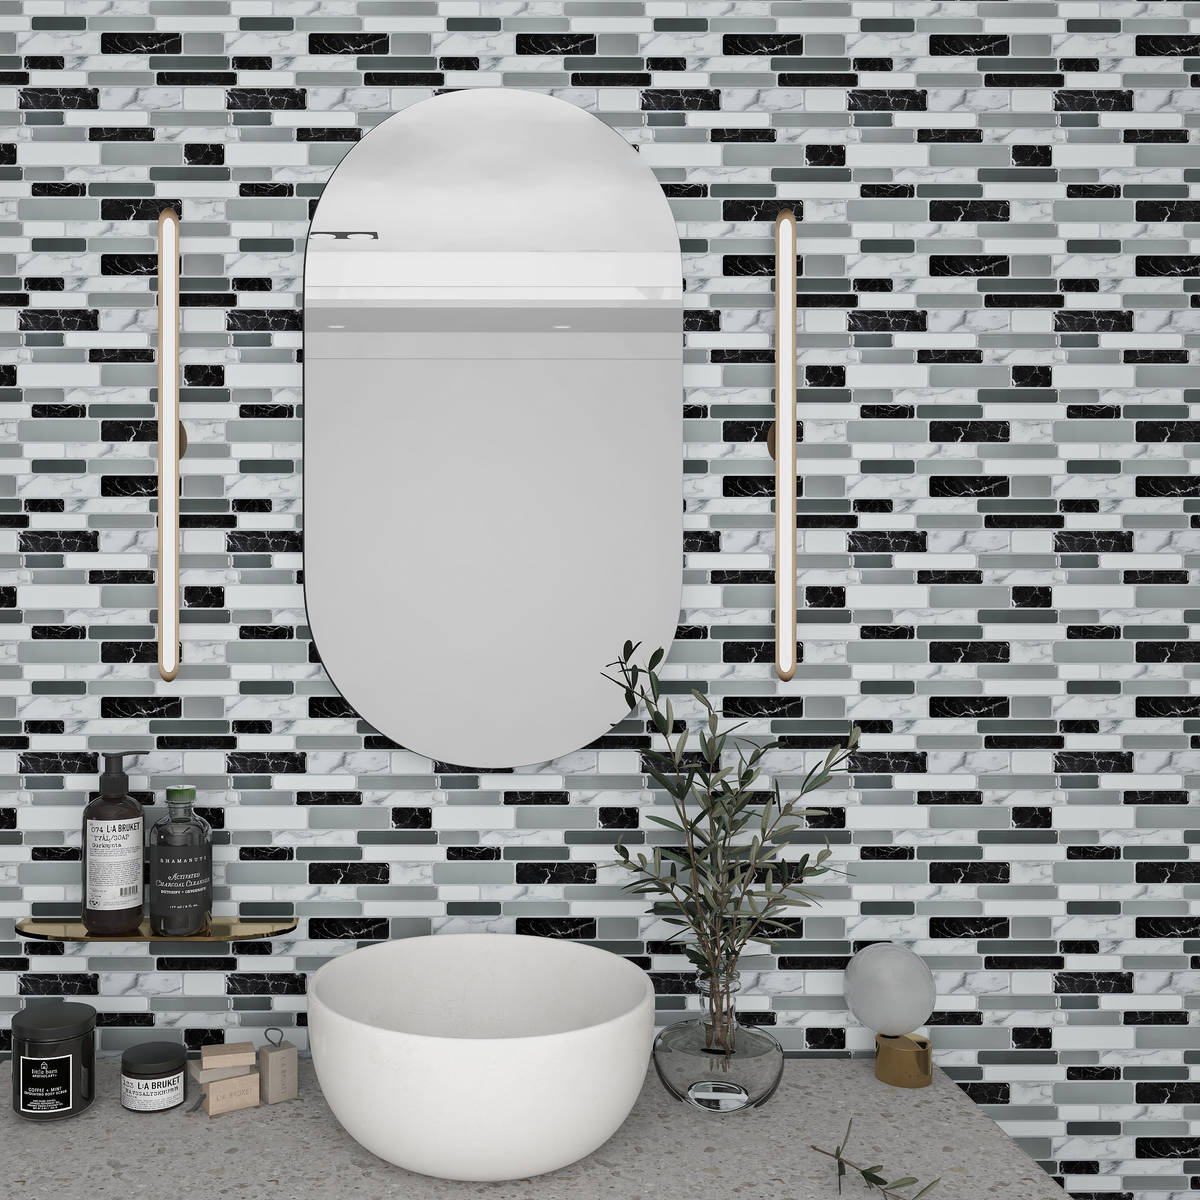 Art3d peel-and-stick tiles are bacteria- and mold-resistant and perfect bathroom backsplashes. ...